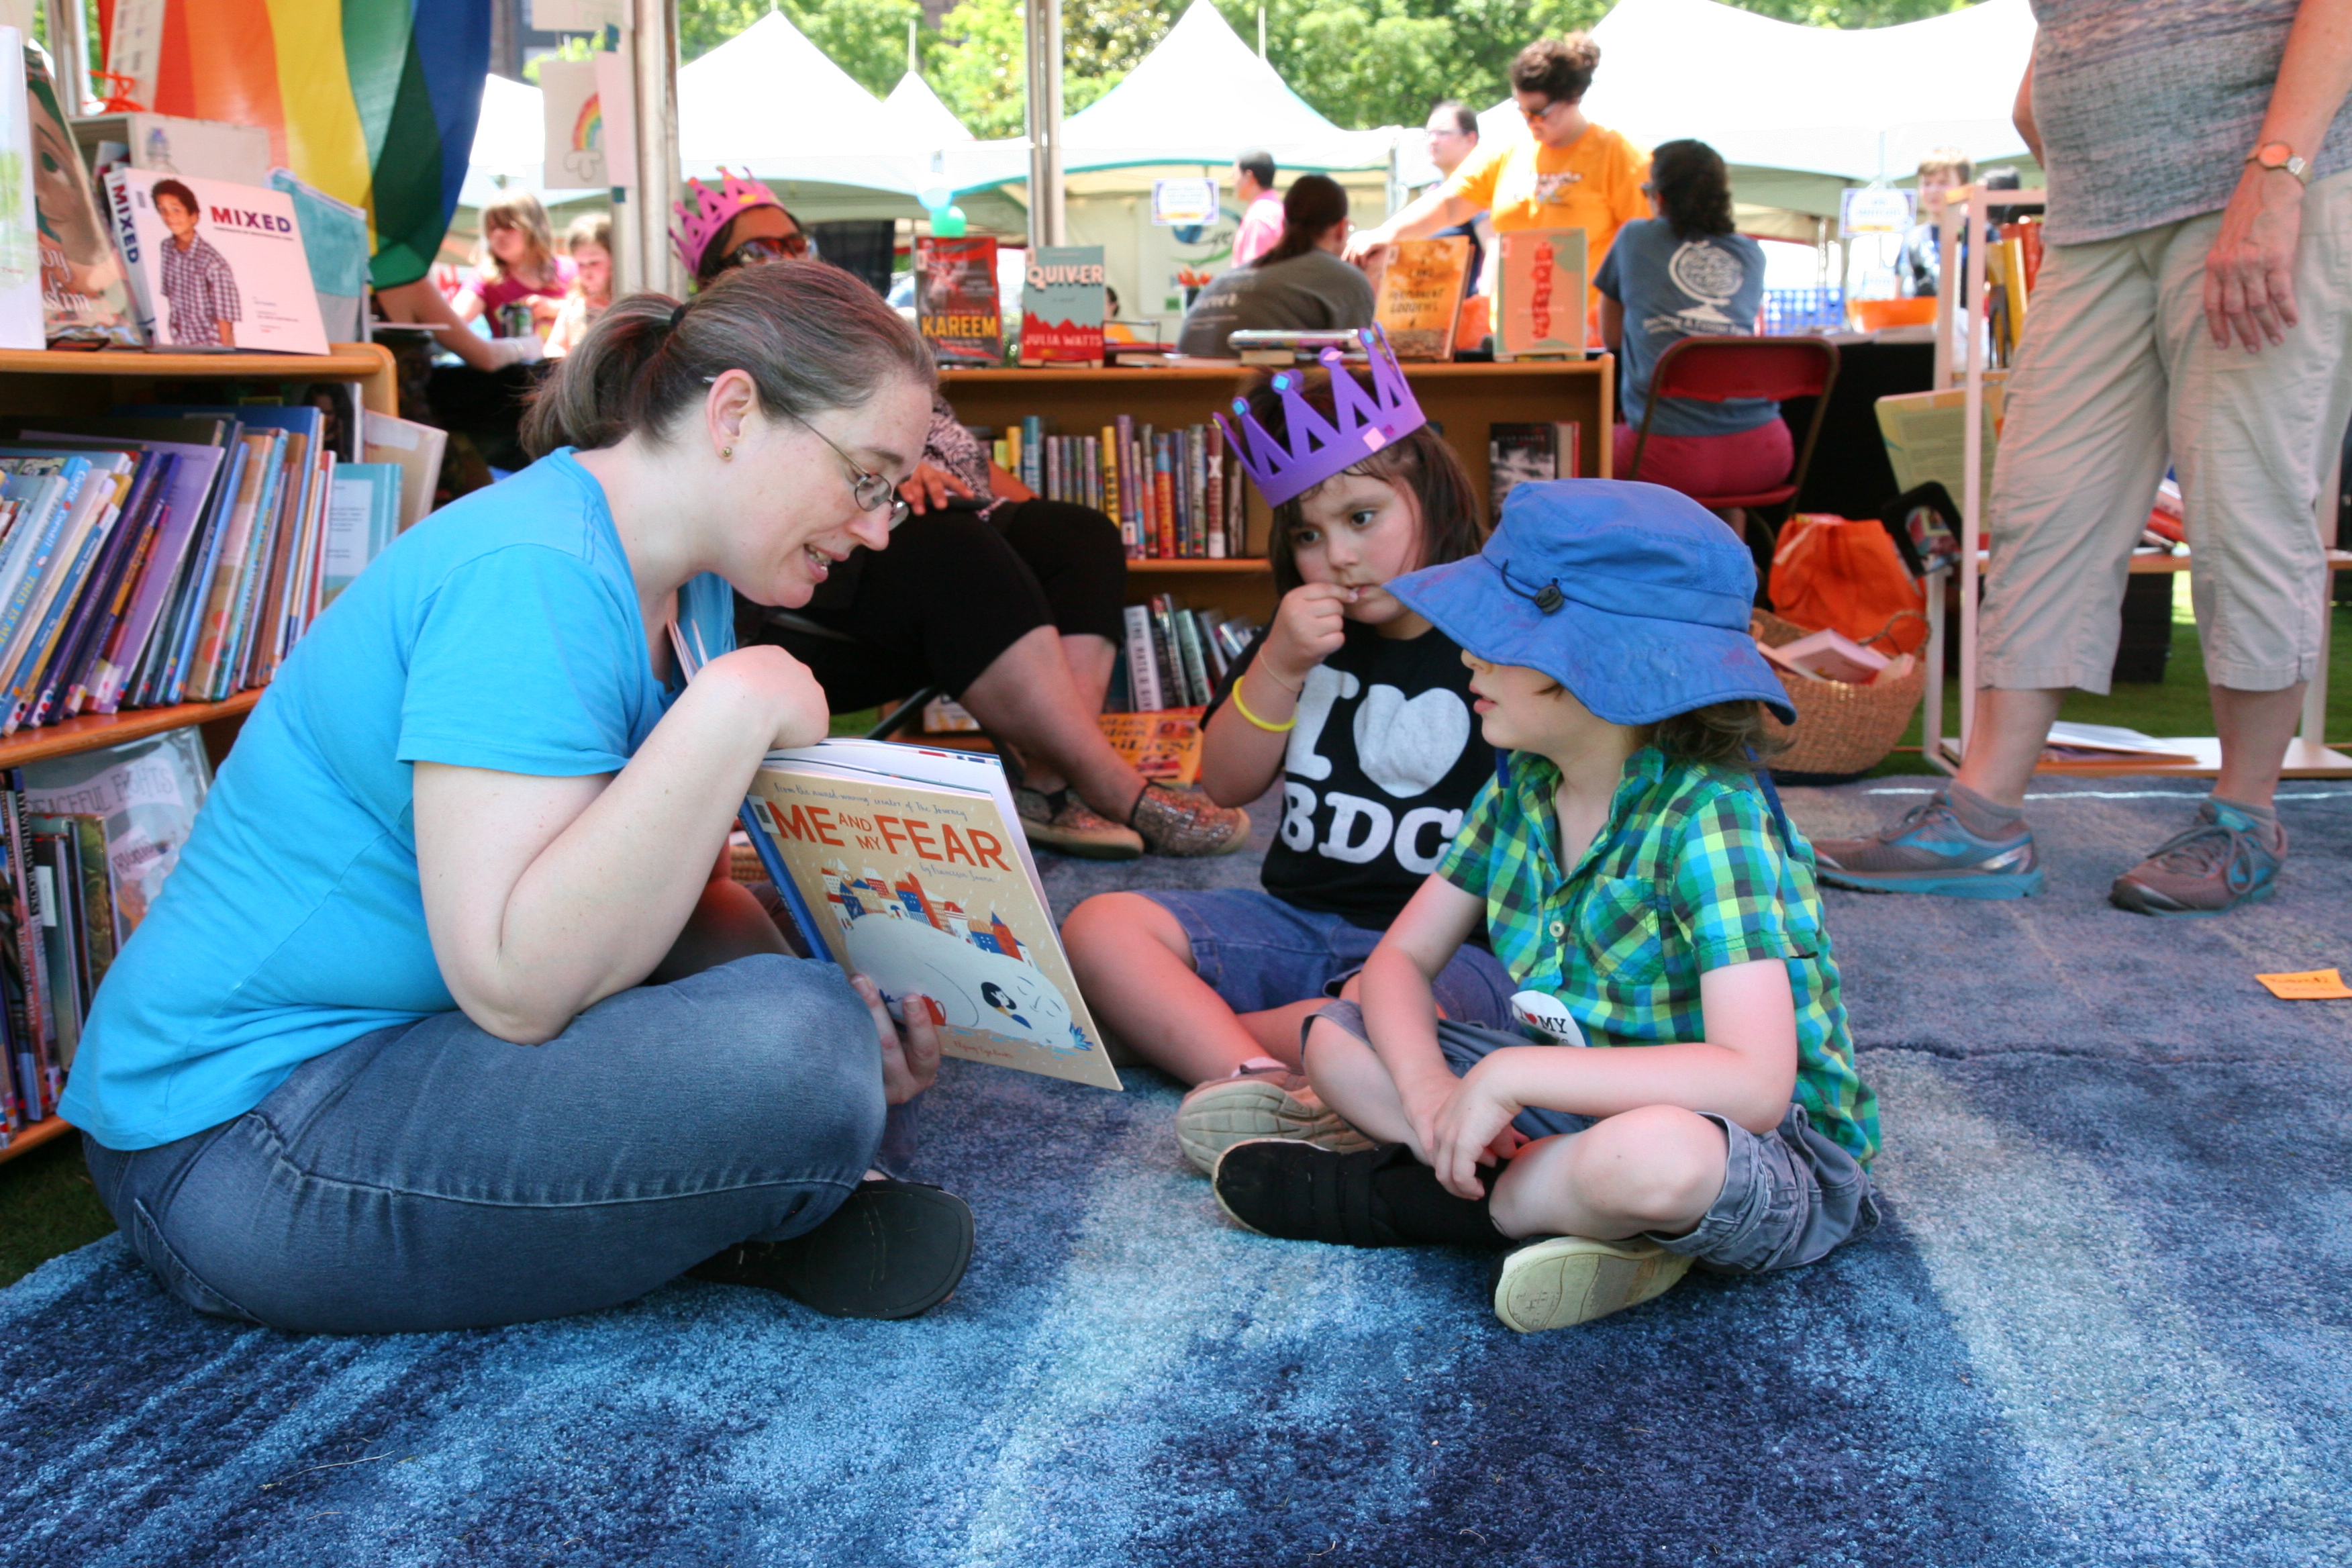 Librarian reading to children during the Children’s Festival of Reading event